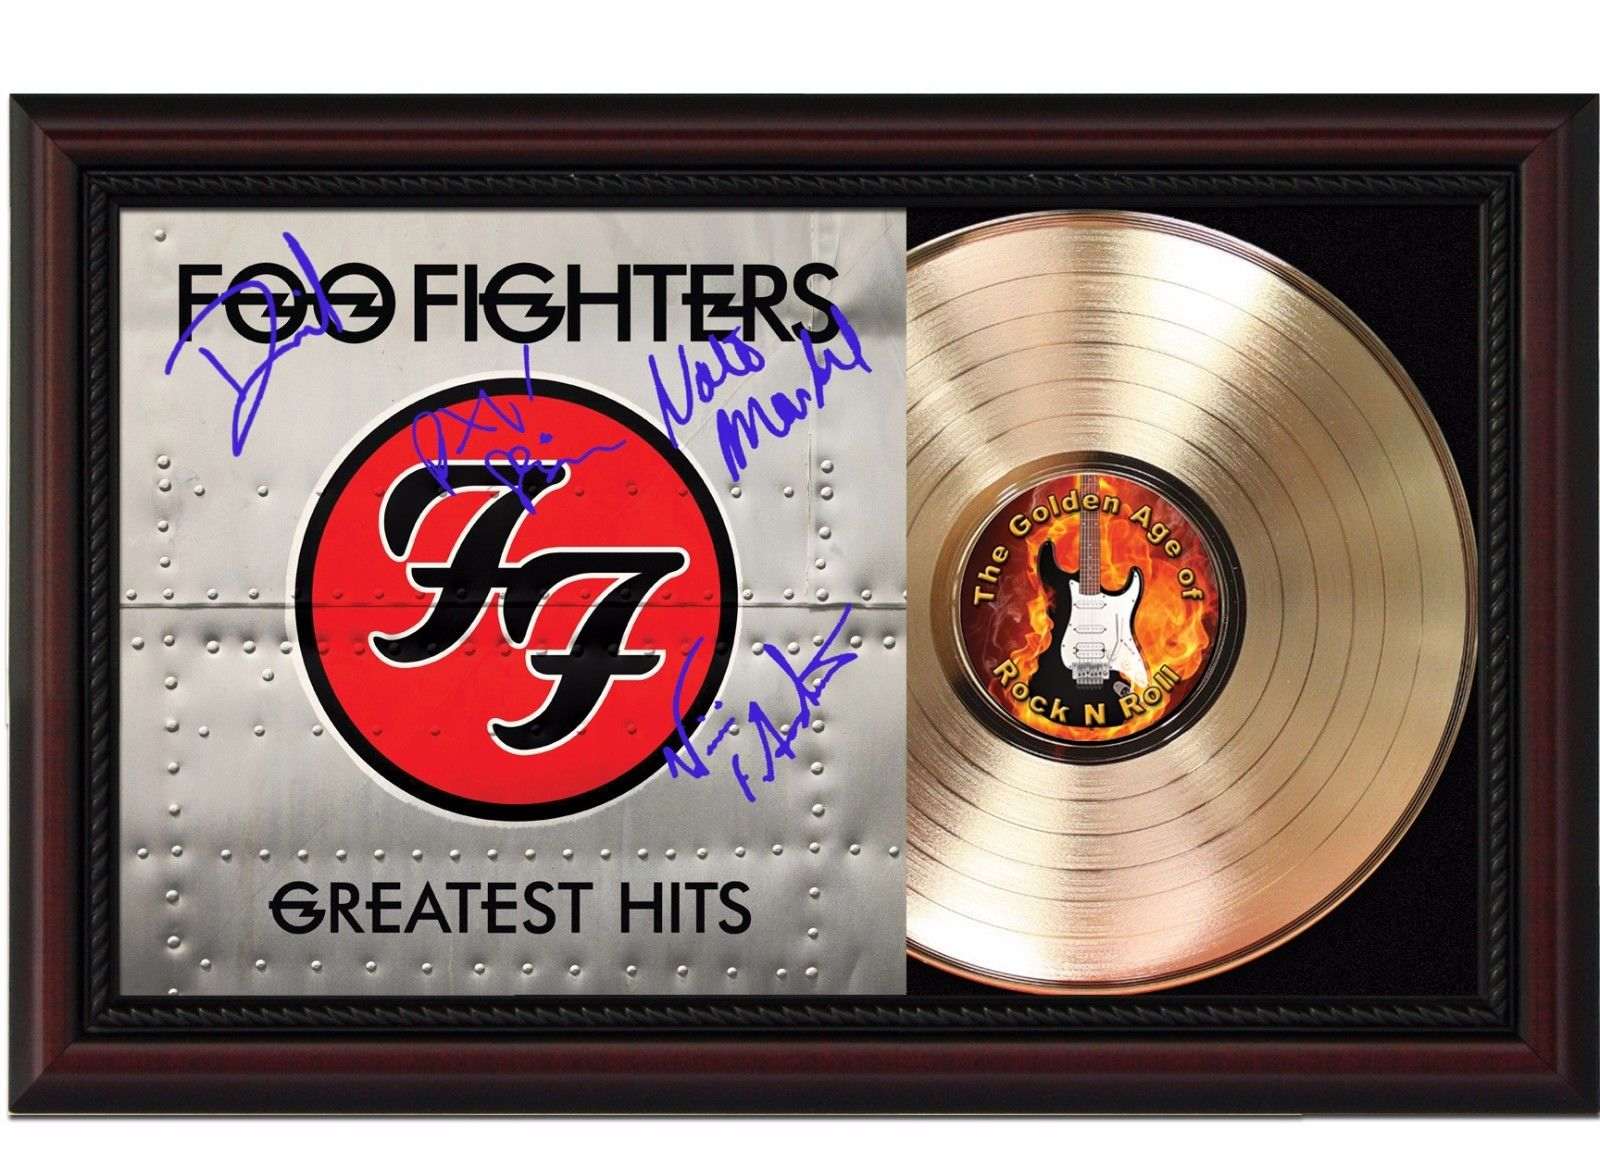 Foo Fighters Greatest Hits Cherry Wood Gold Lp Record Framed Signature Display M4 Gold Record Outlet Album And Disc Collectible Memorabilia